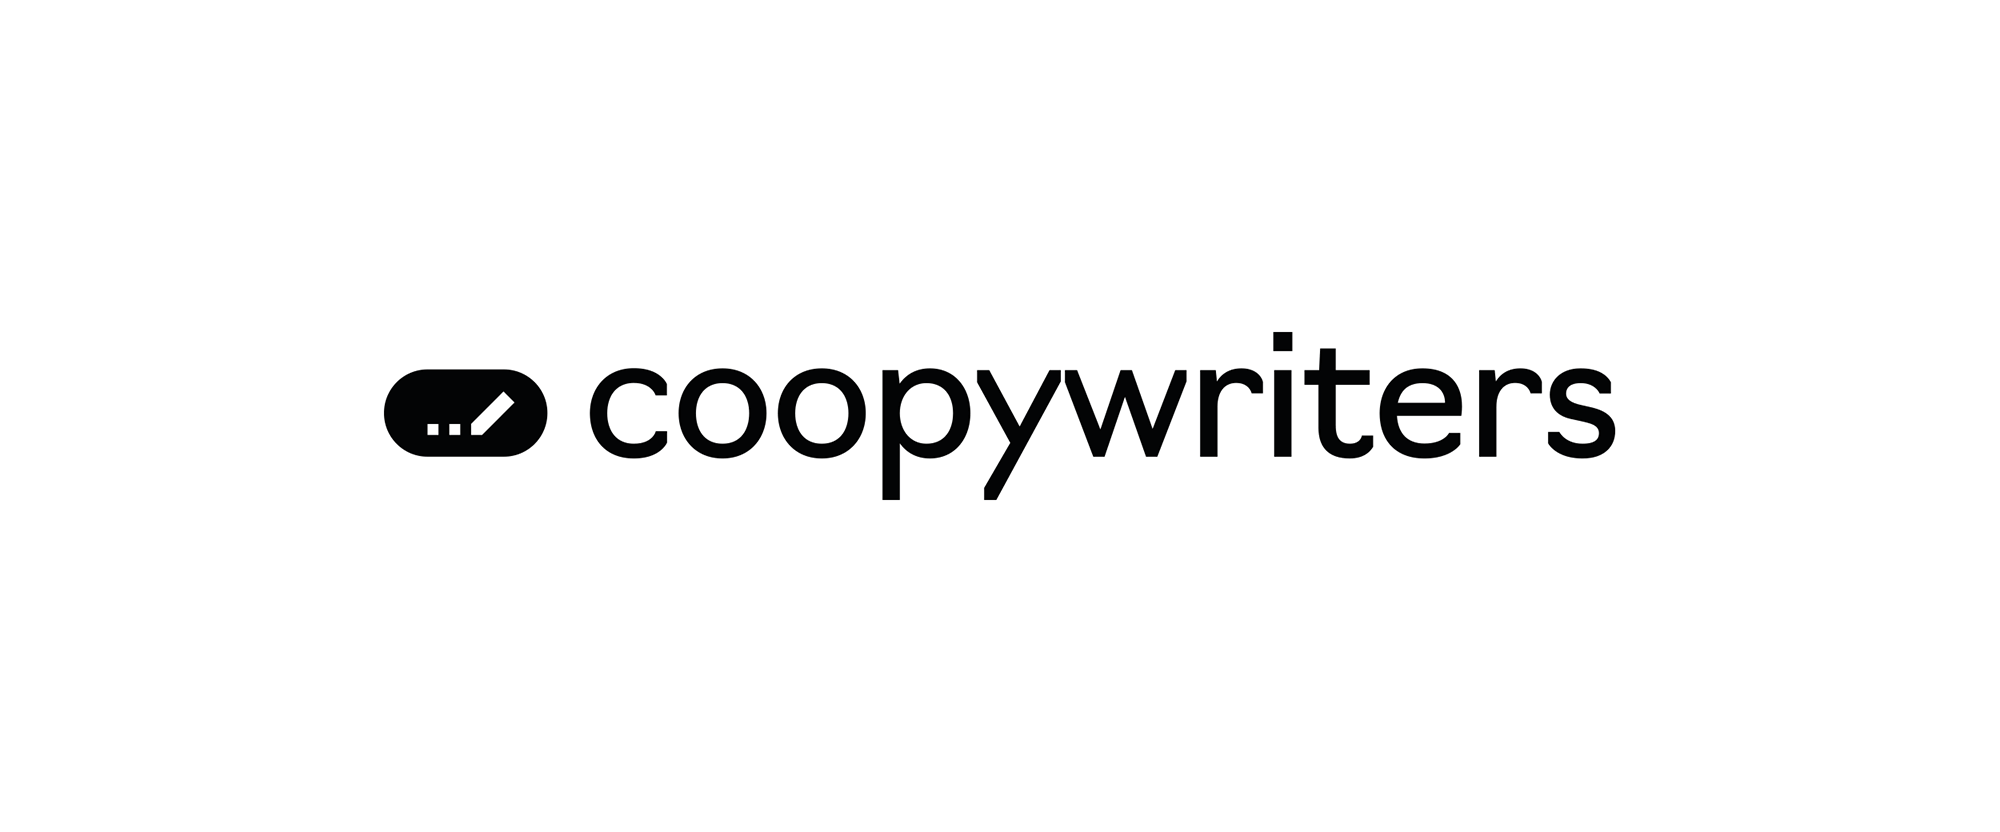 New Logo and Identity for Coopywriters by Sulliwan Studio